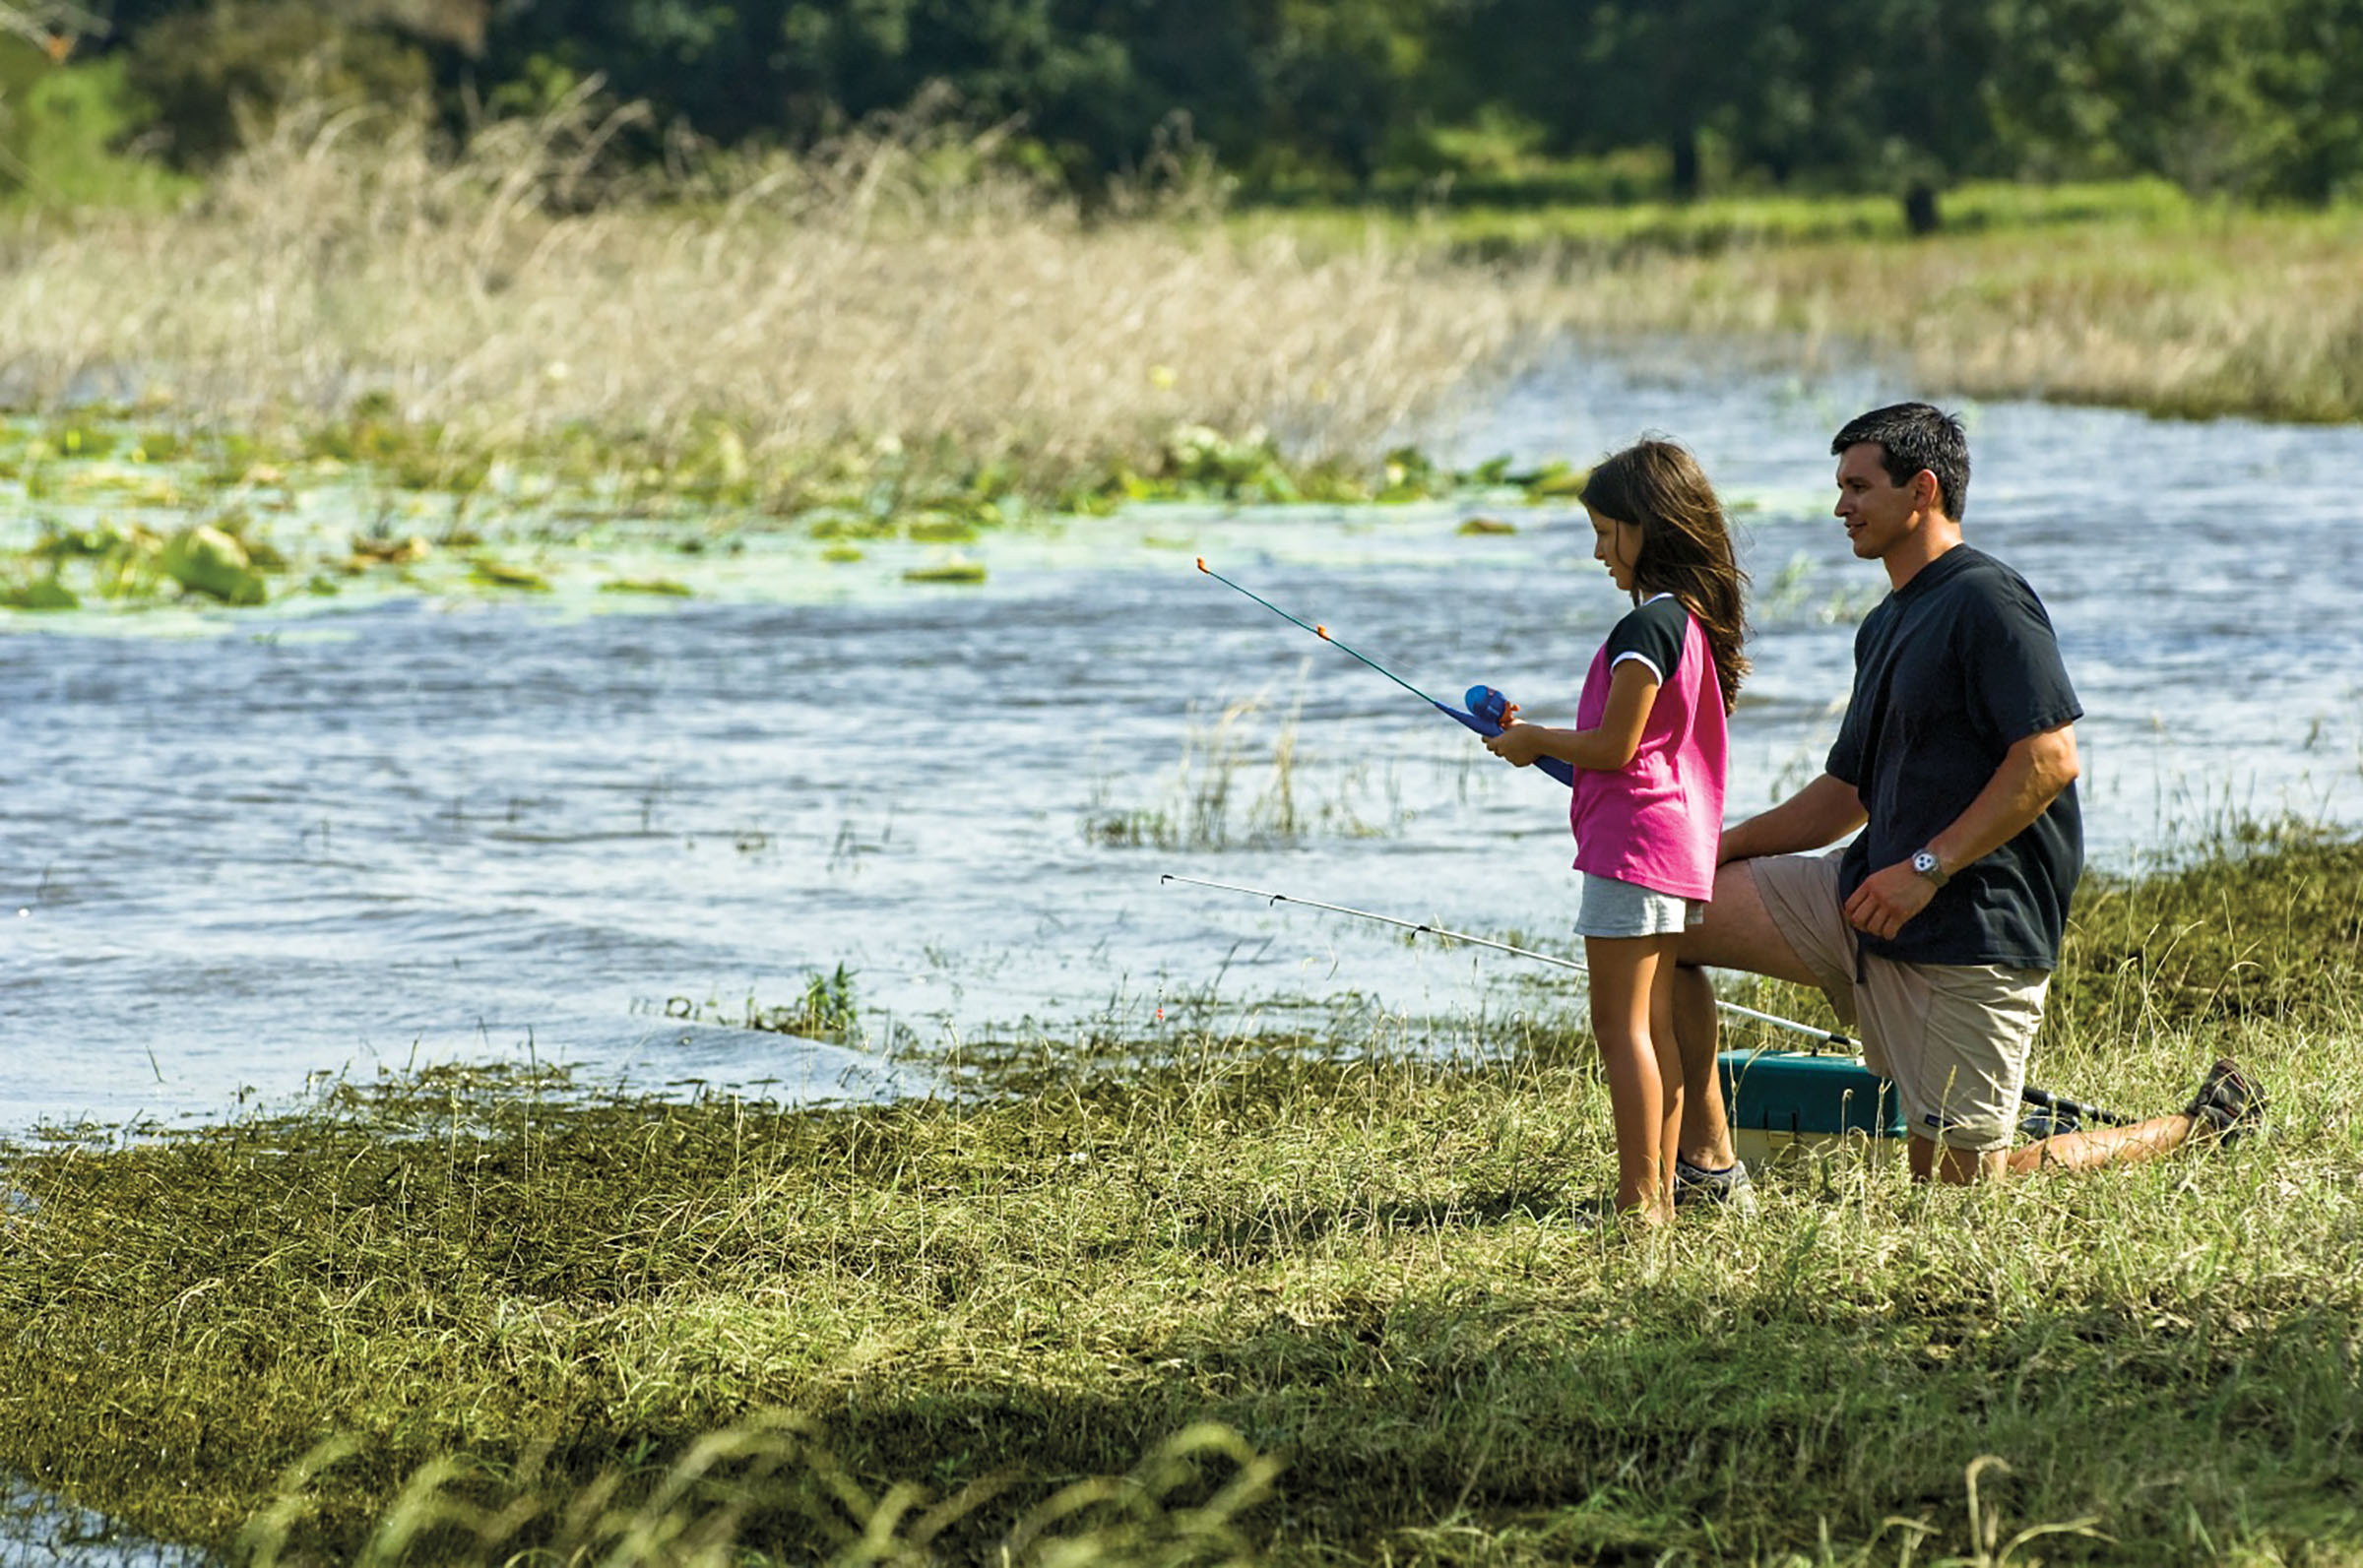 A man and a young woman kneel with fishing rods next to a small body of water and lots of green grass